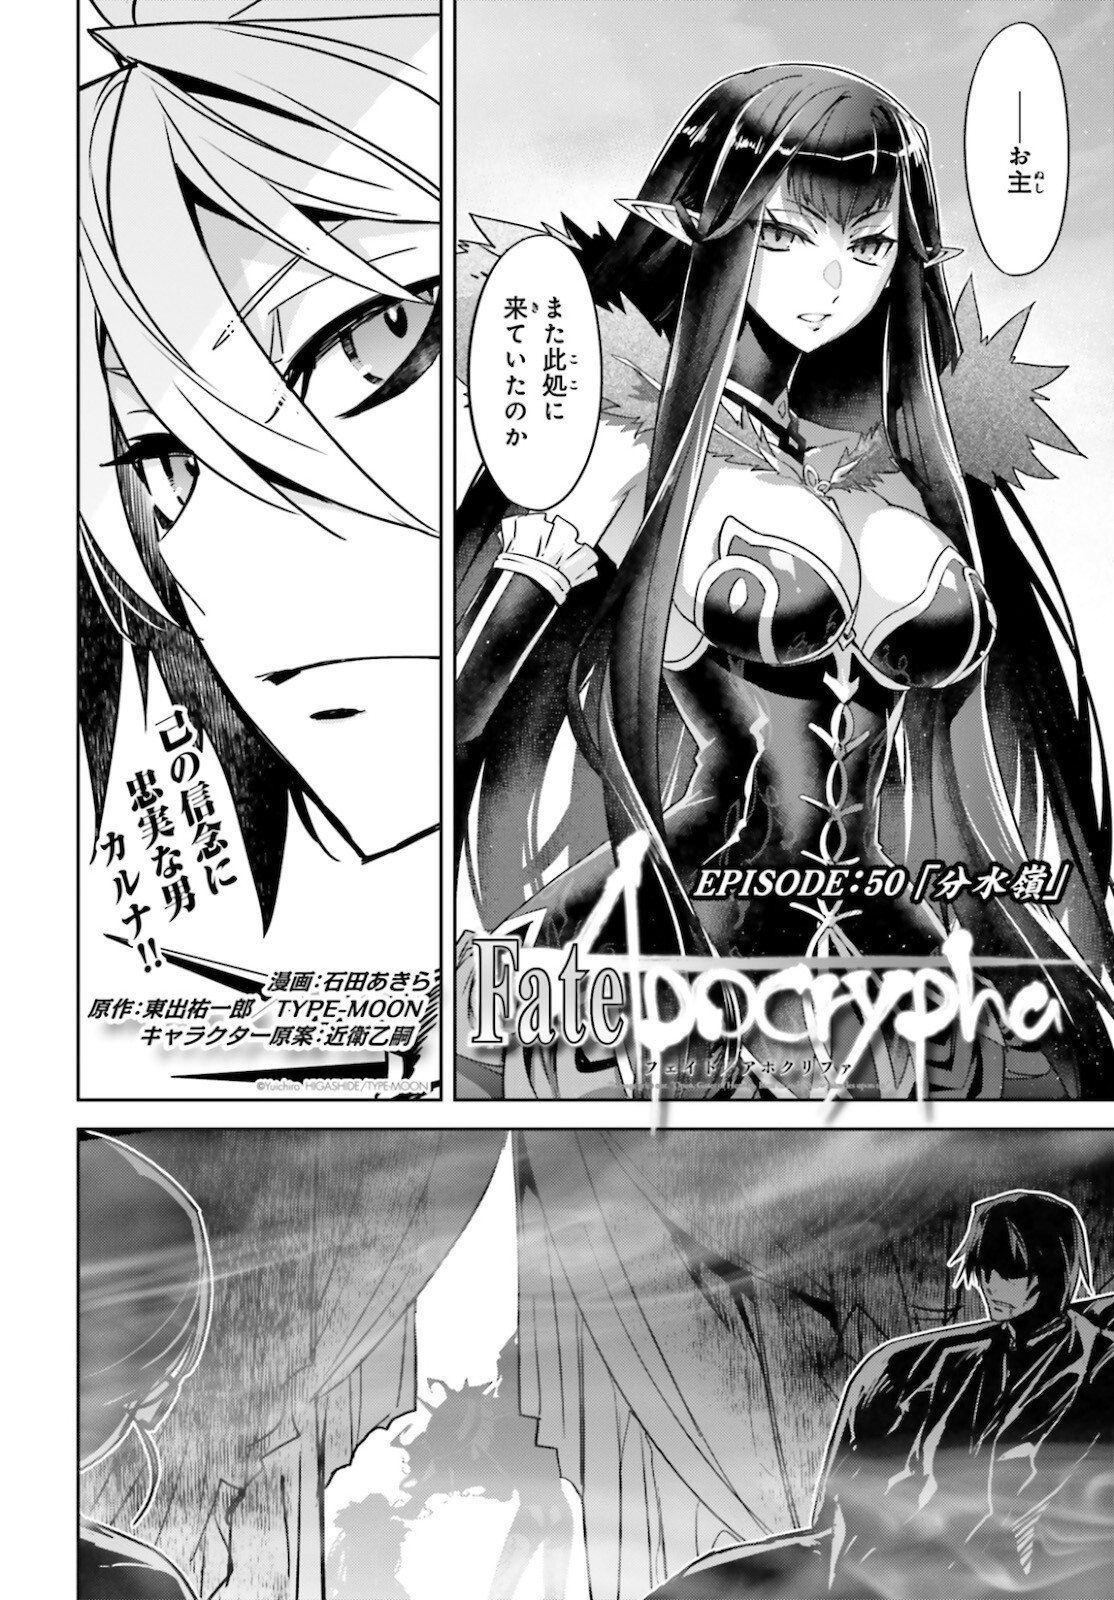 Fate-Apocrypha - Chapter 50 - Page 2